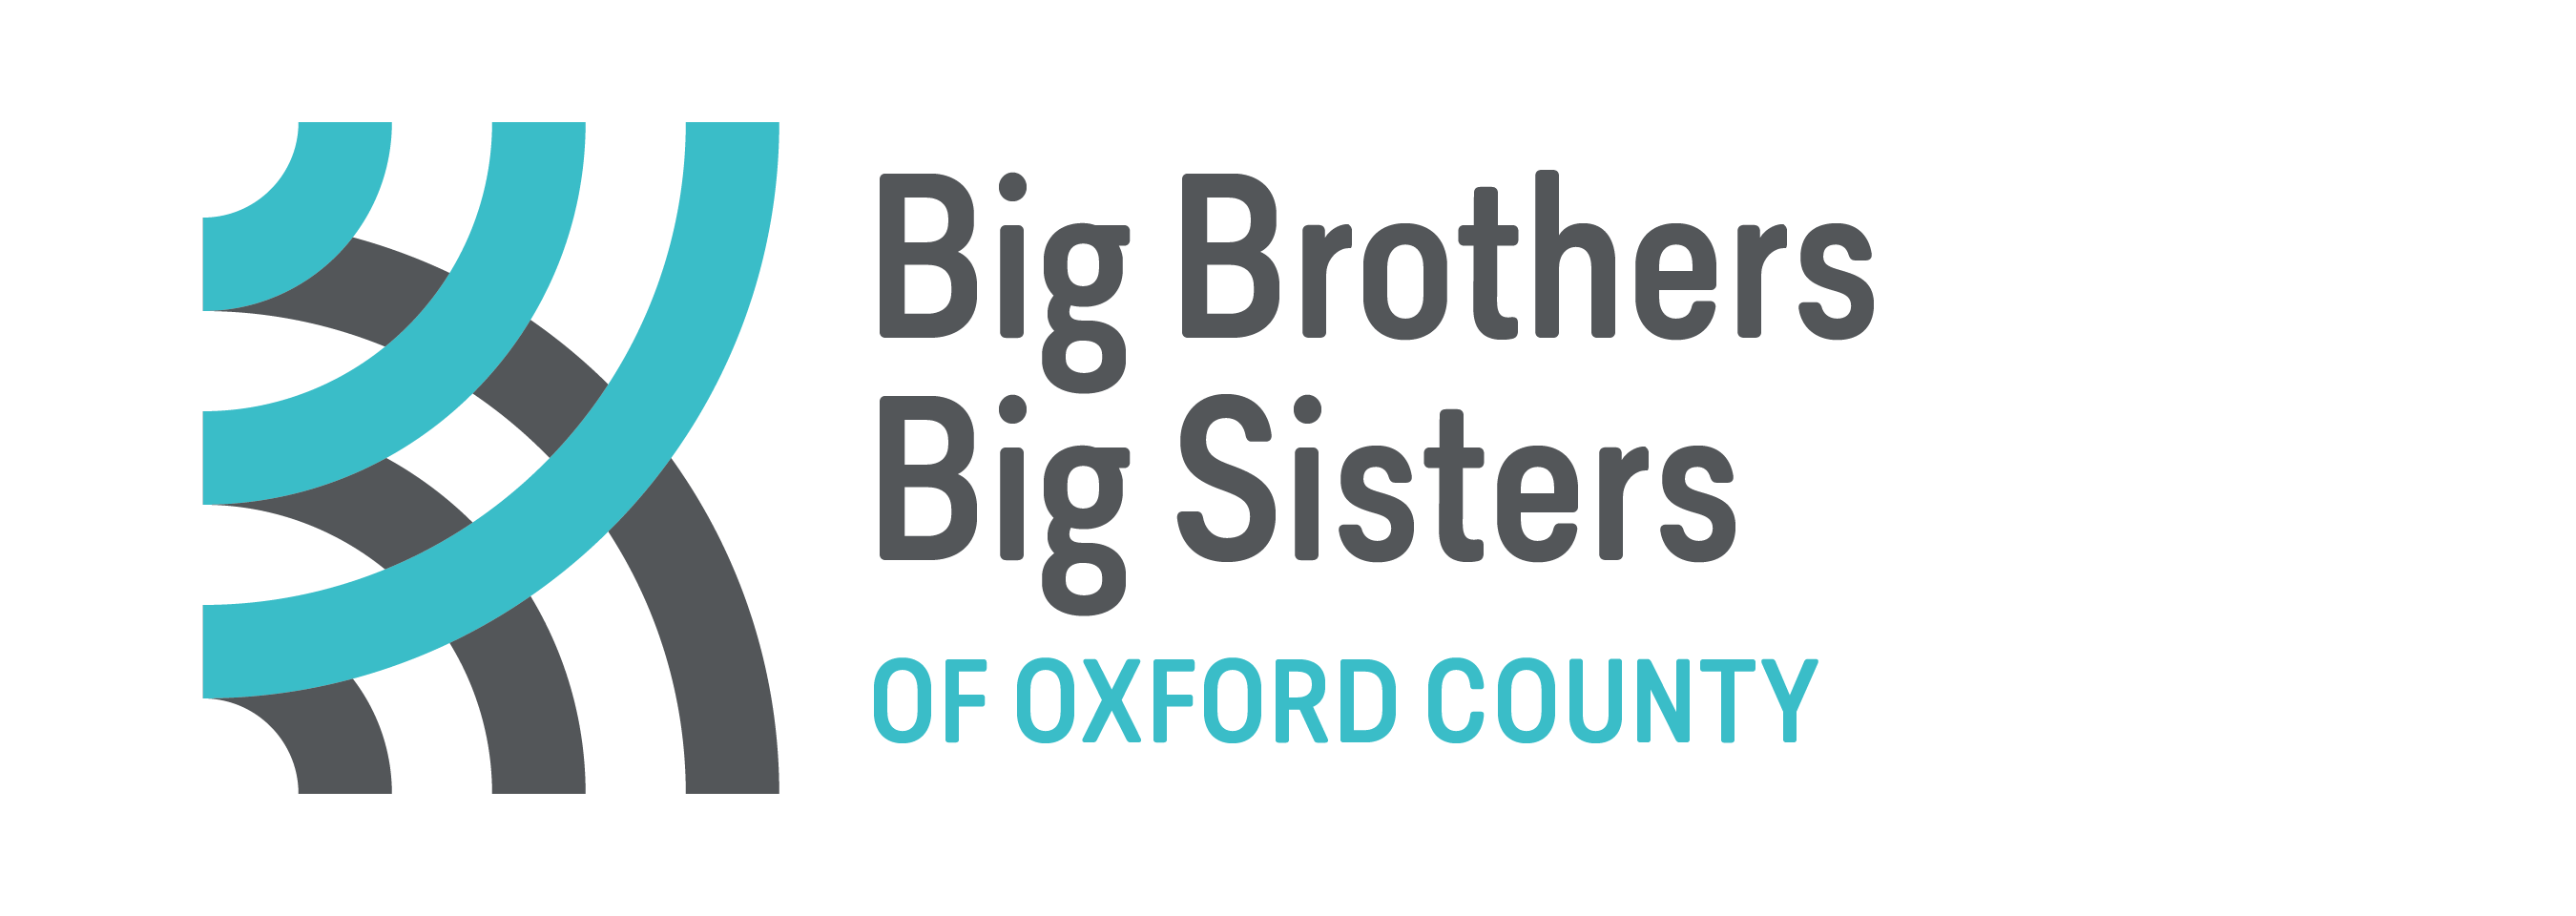 Big Brothers Big Sisters of Oxford County logo